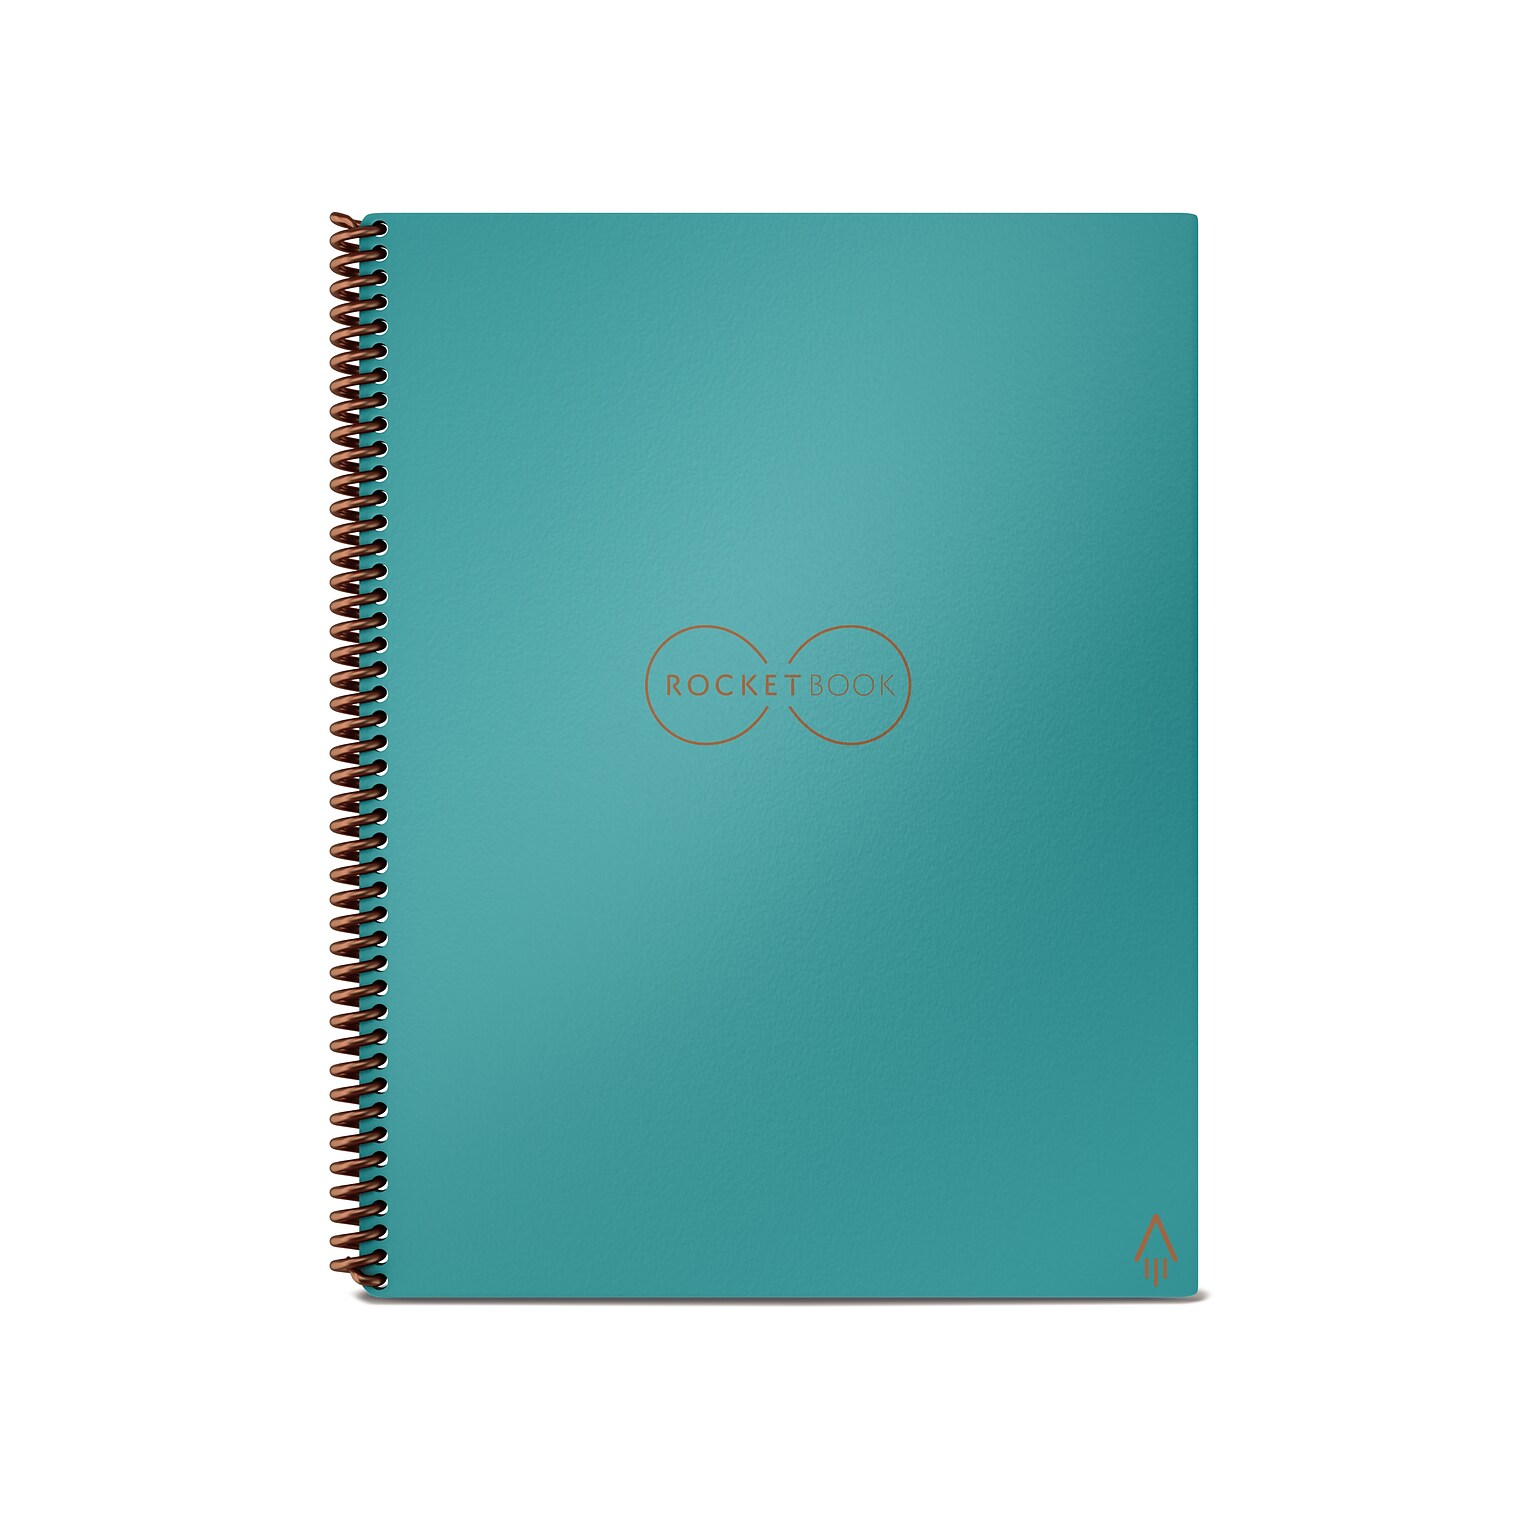 Rocketbook Core Reusable Smart Notebook, 8.5 x 11, Dot-Grid Ruled, 32 Pages, Teal  (EVR-L-RC-CCE-FR)